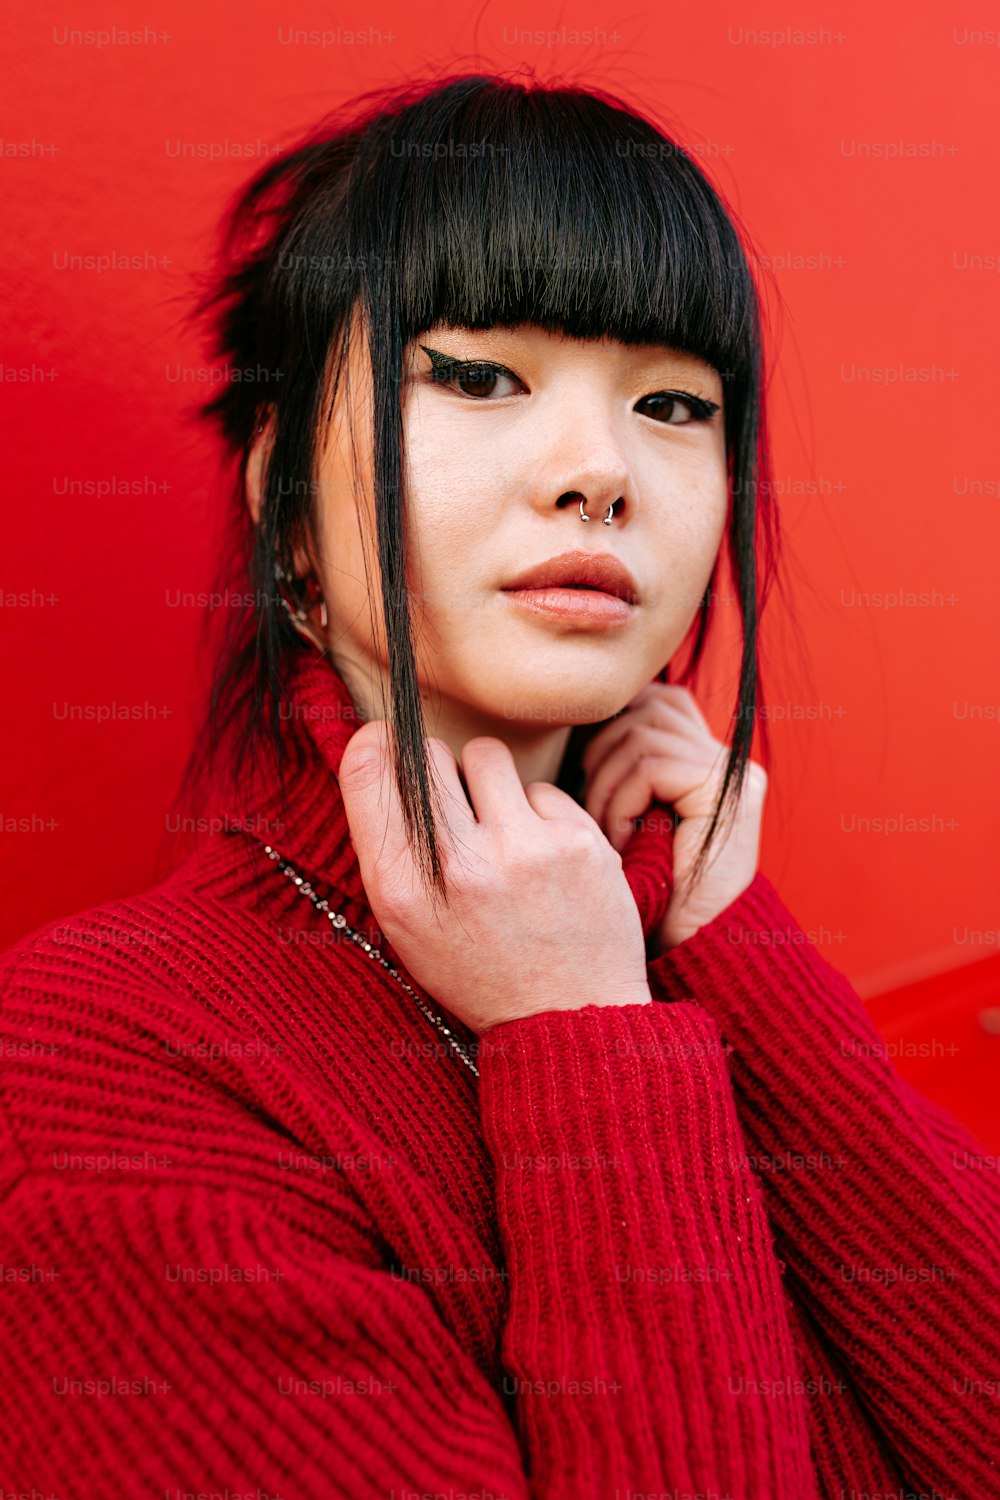 a woman with black hair wearing a red sweater